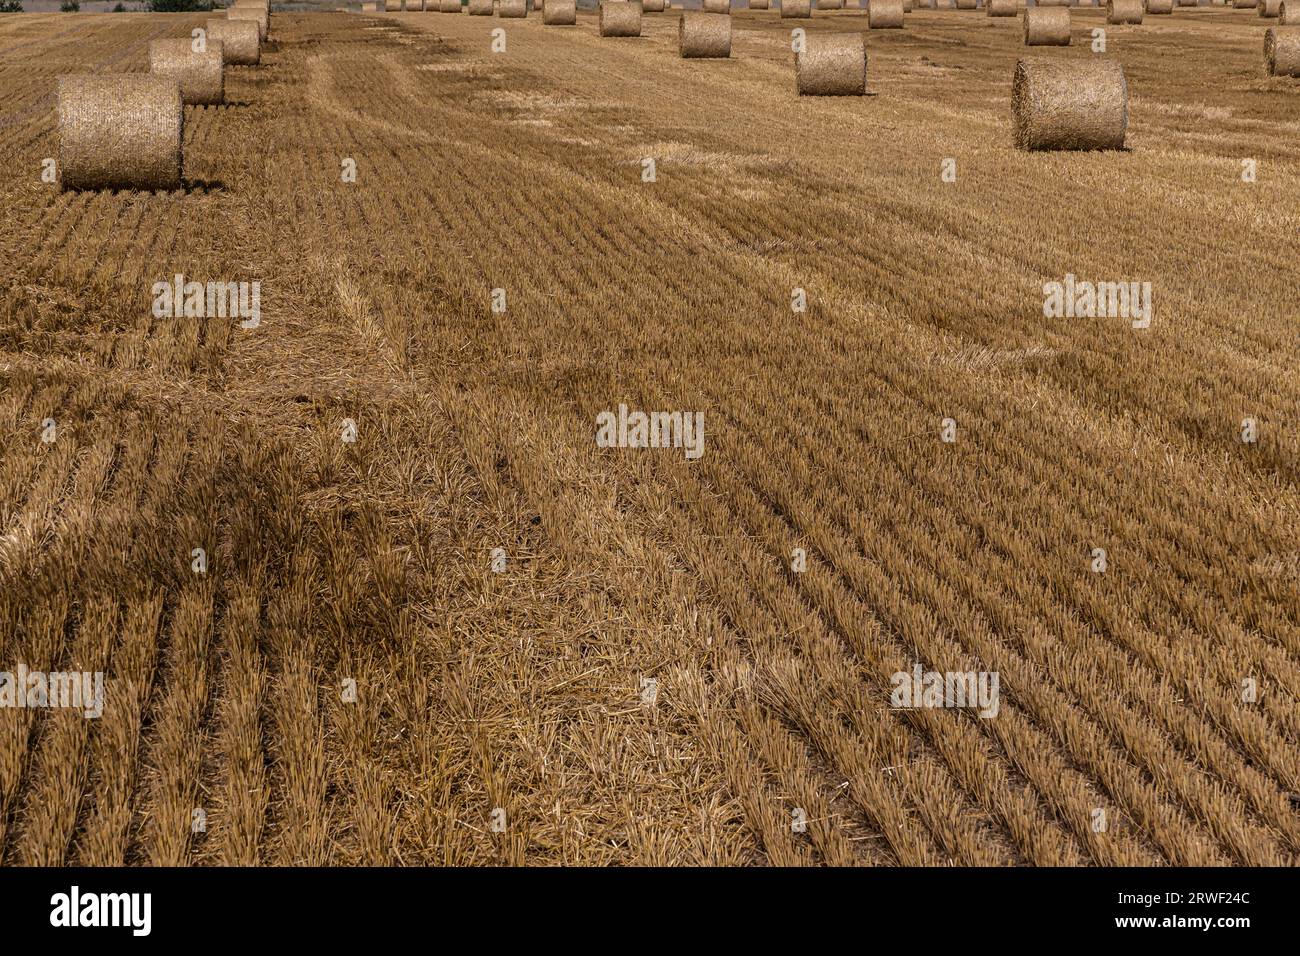 Stacks of straw - bales of hay, rolled into stacks left after harvesting of wheat ears, agricultural farm field with gathered crops rural. Stock Photo